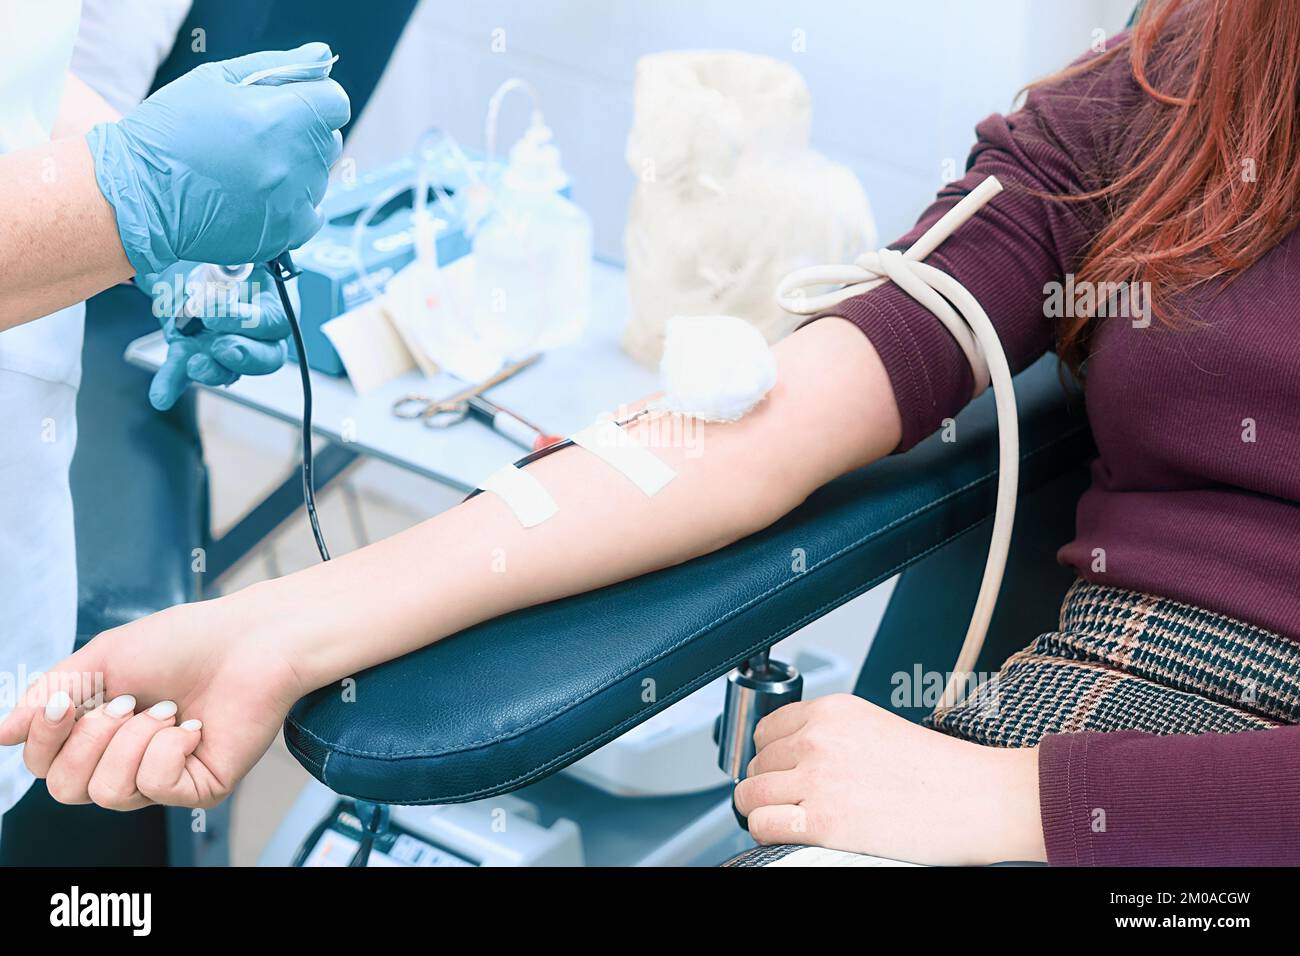 Health worker takes blood from woman's vein. Topic of donation. Female donor sitting in medical chair. Female hand with close-up dropper.. Stock Photo